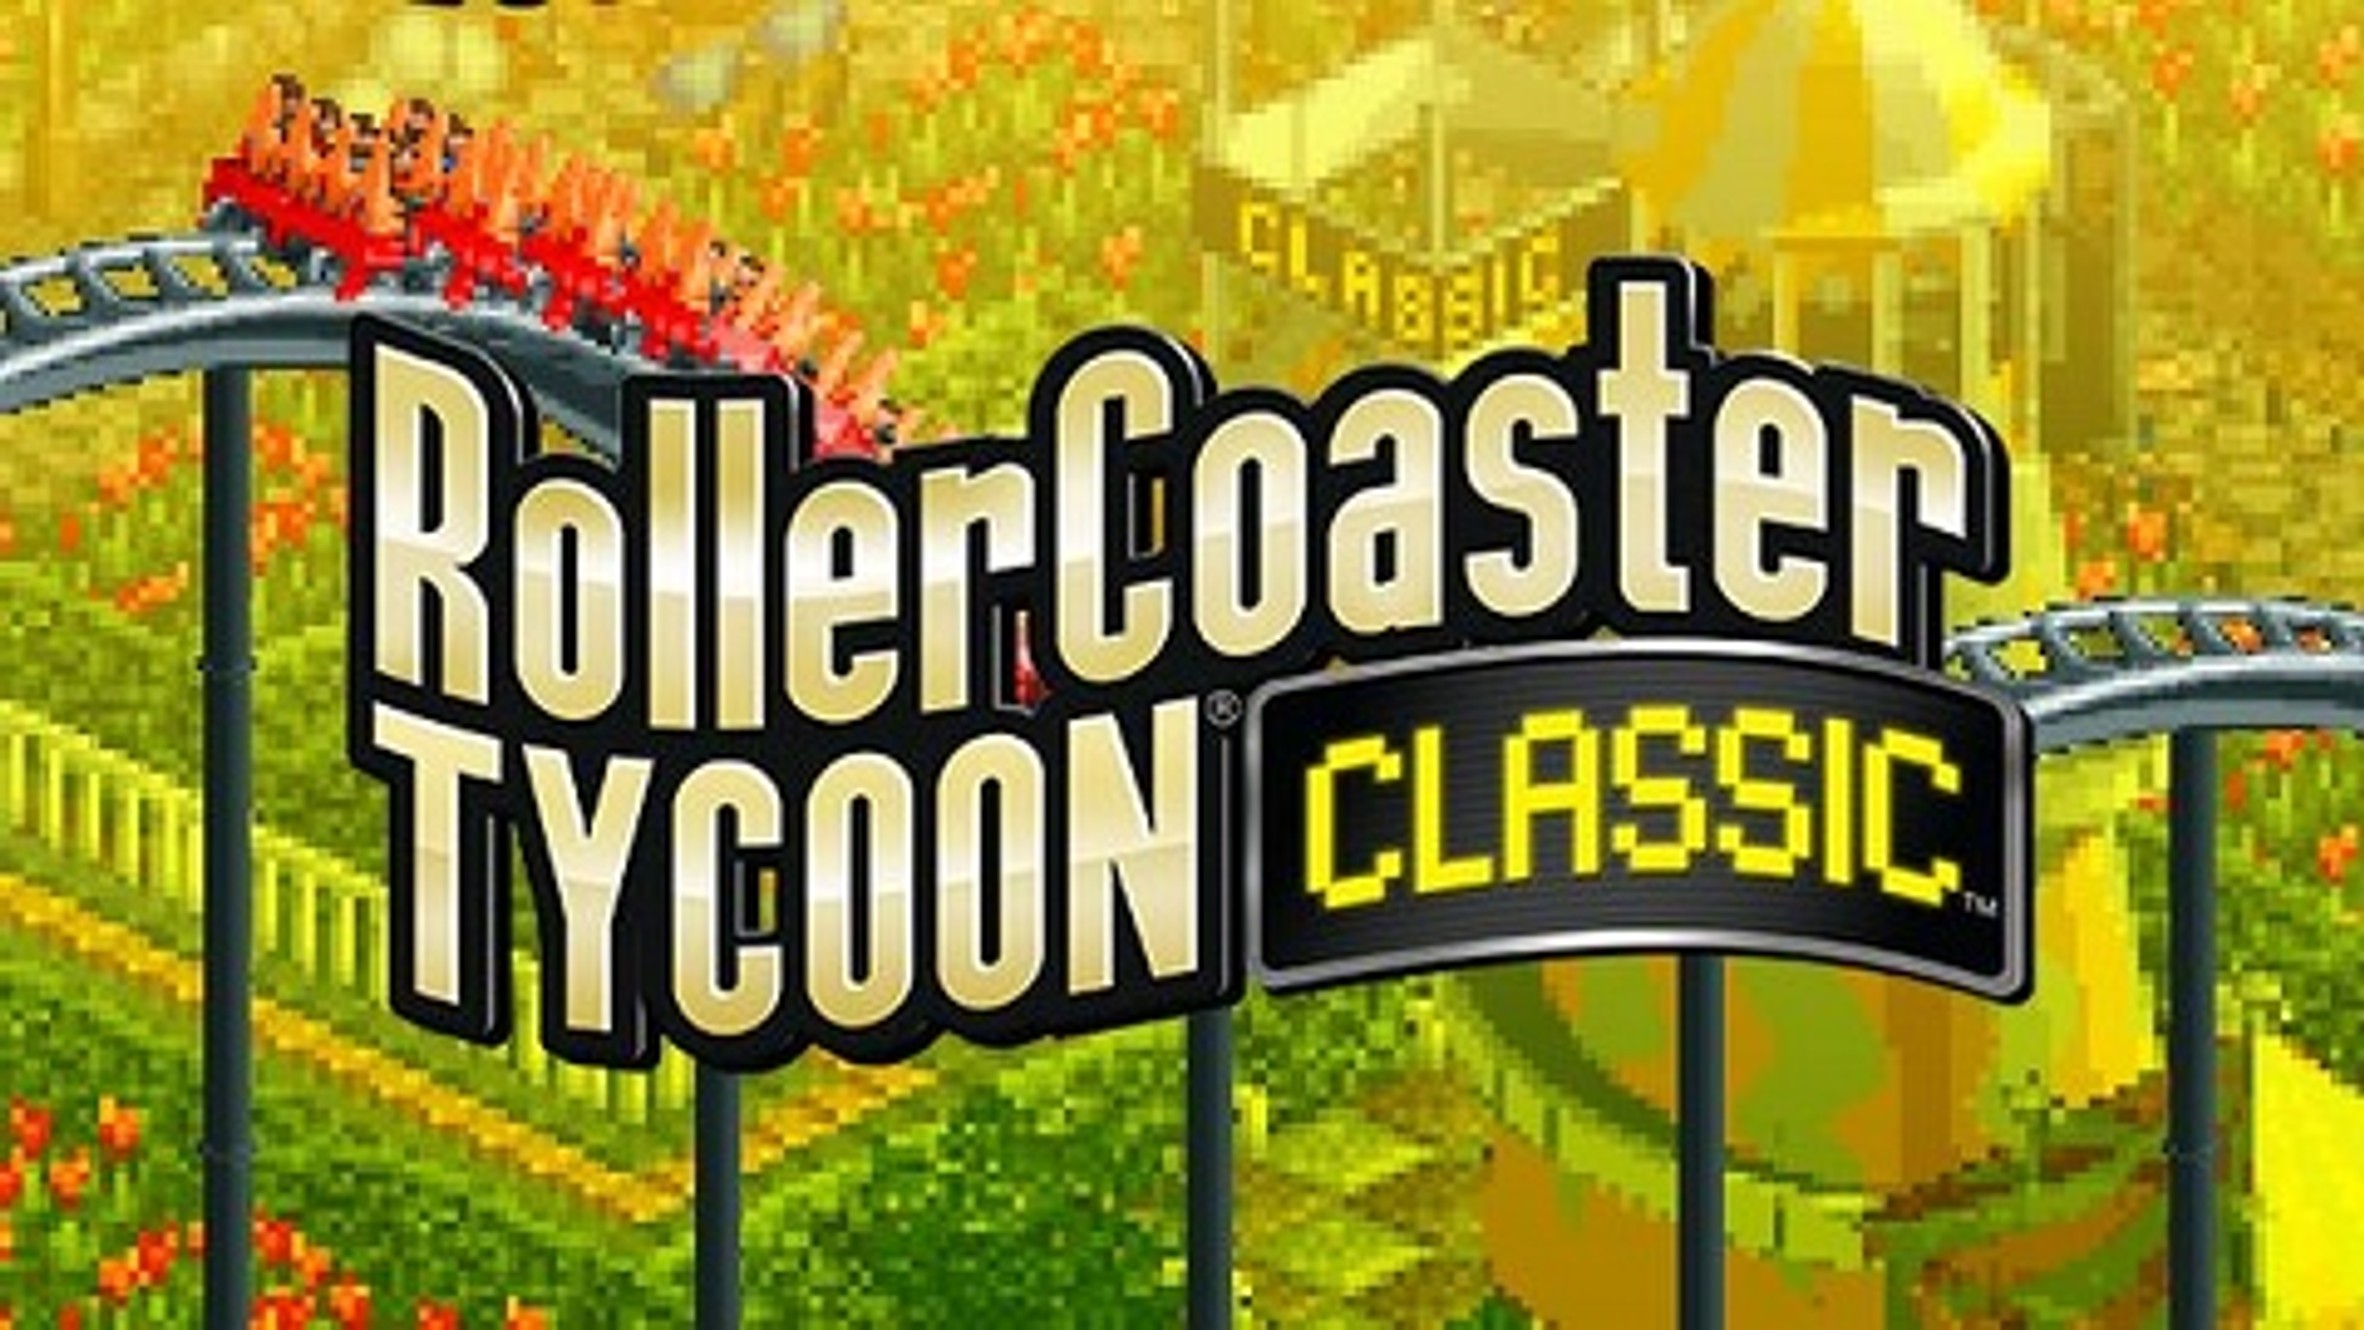 roller coaster tycoon classic free download yahoo answers